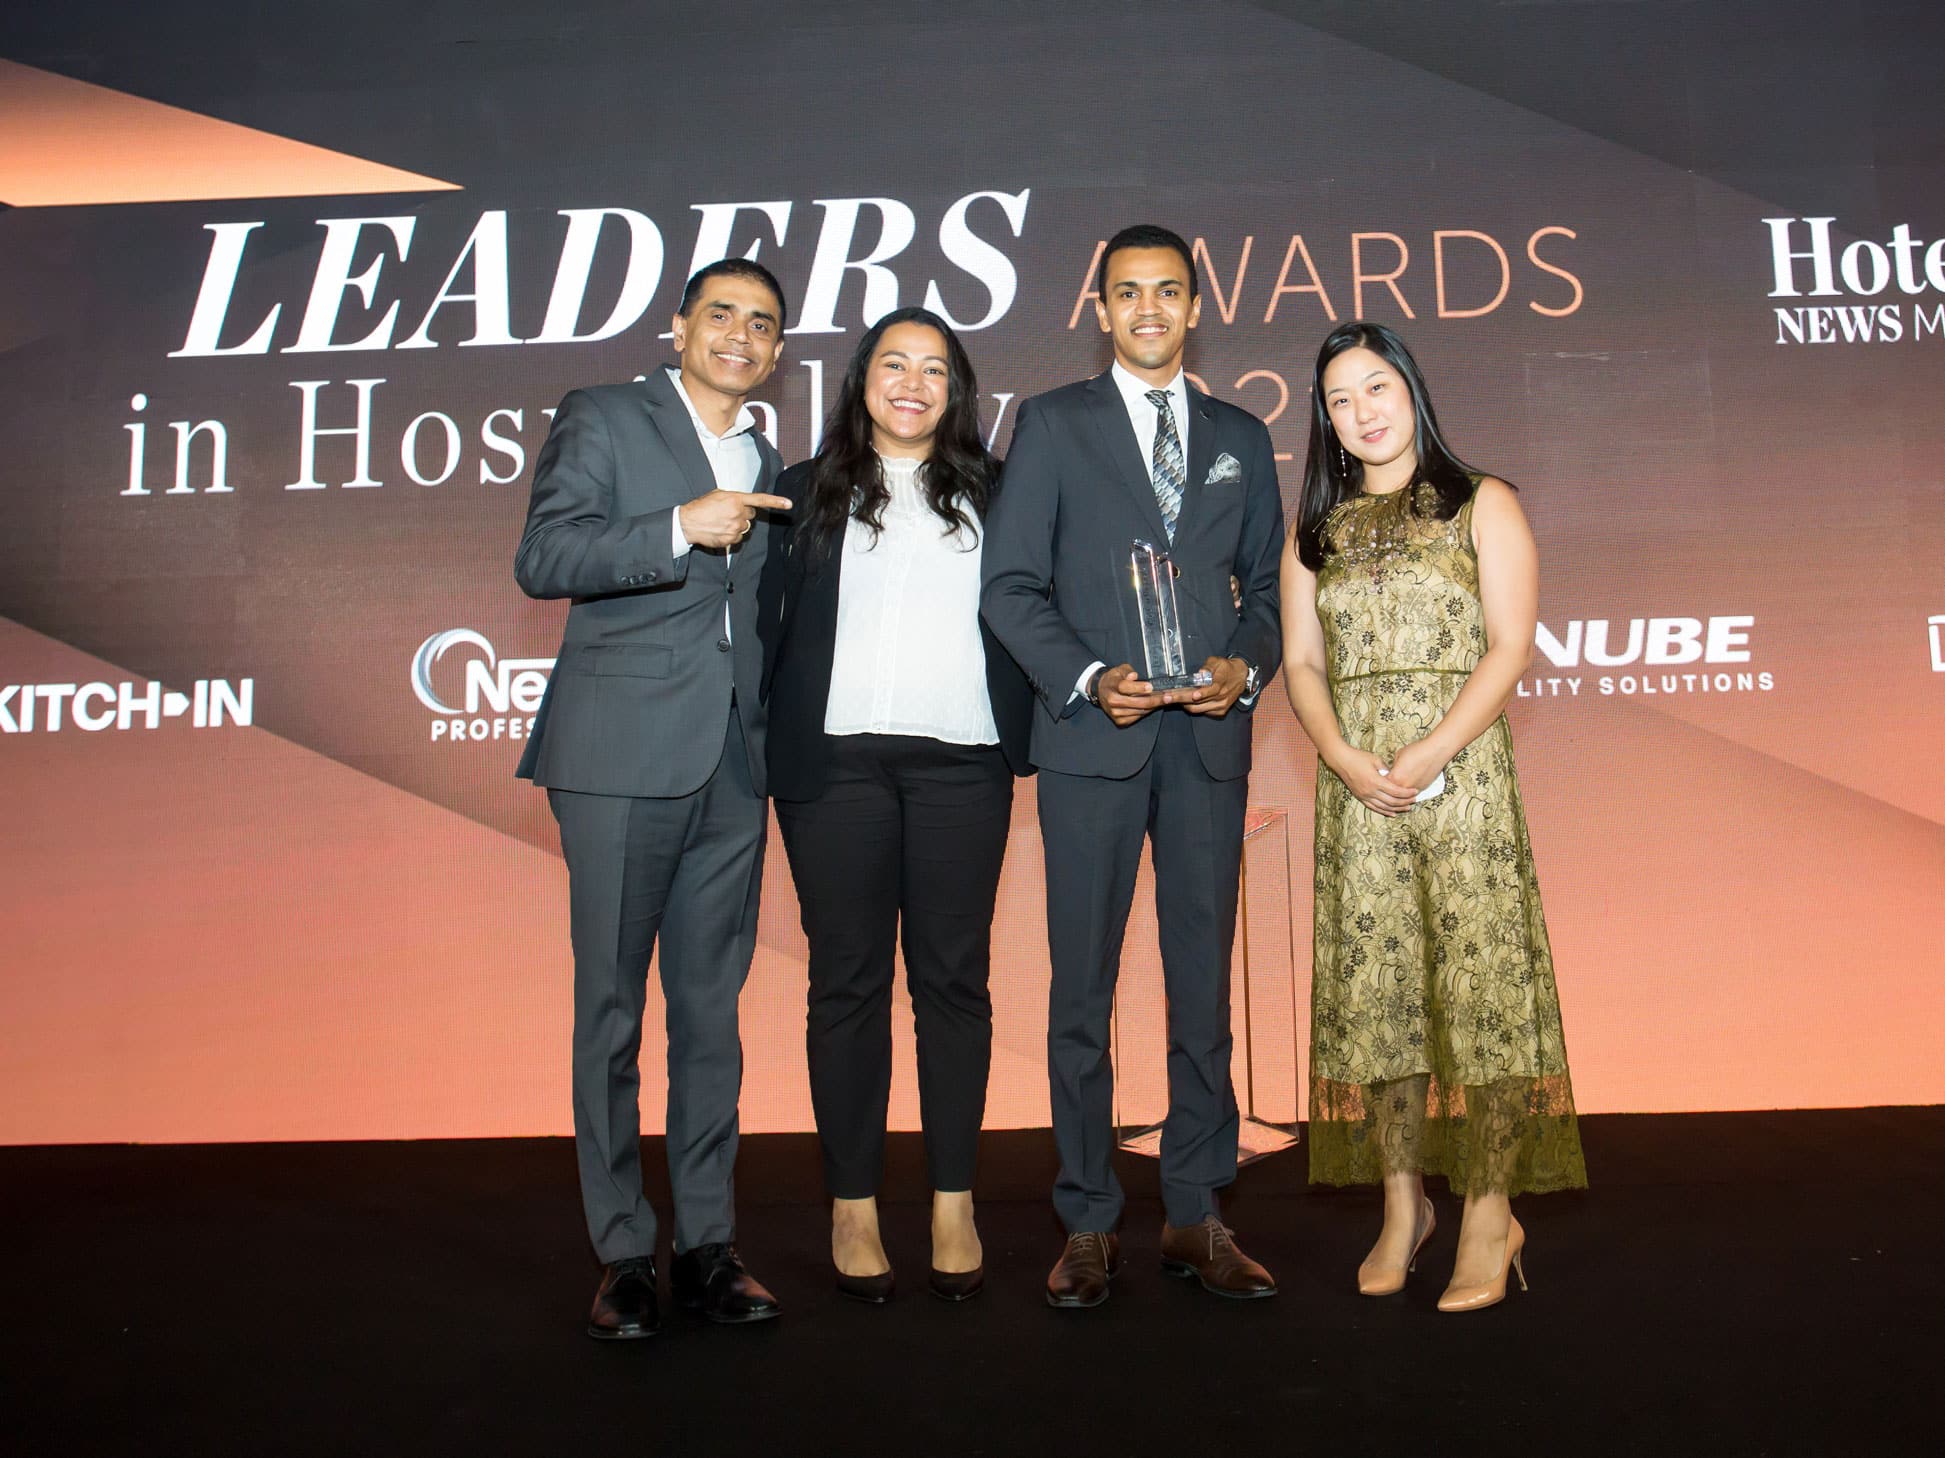 Gallery Leaders in Hospitality Awards 2021 Hotel News ME